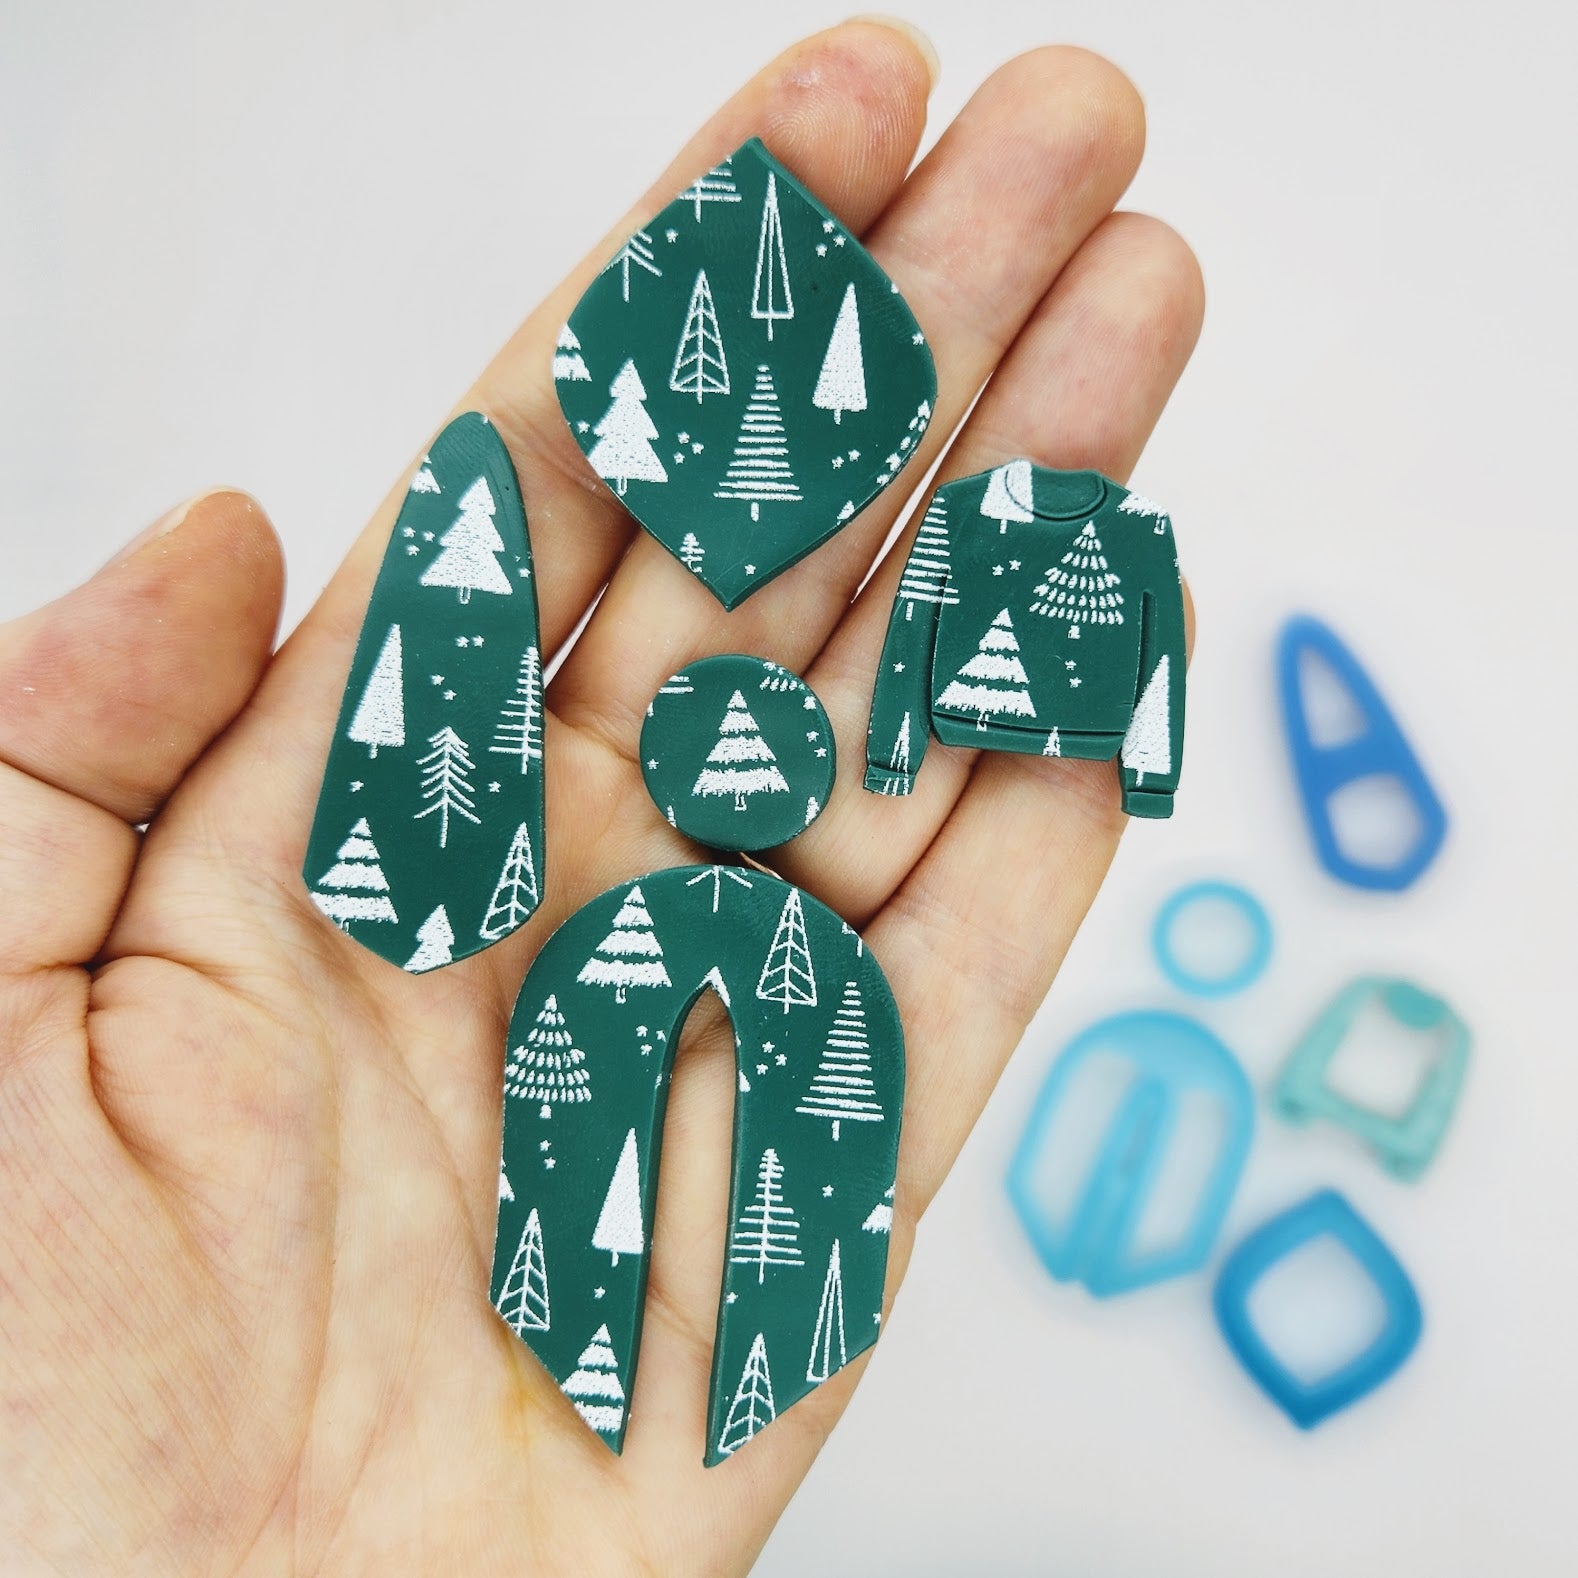 Bohemian Botanical Trees Silkscreen Stencil for Polymer Clay Earrings Jewelry Pendant Charm Ornaments Crafts